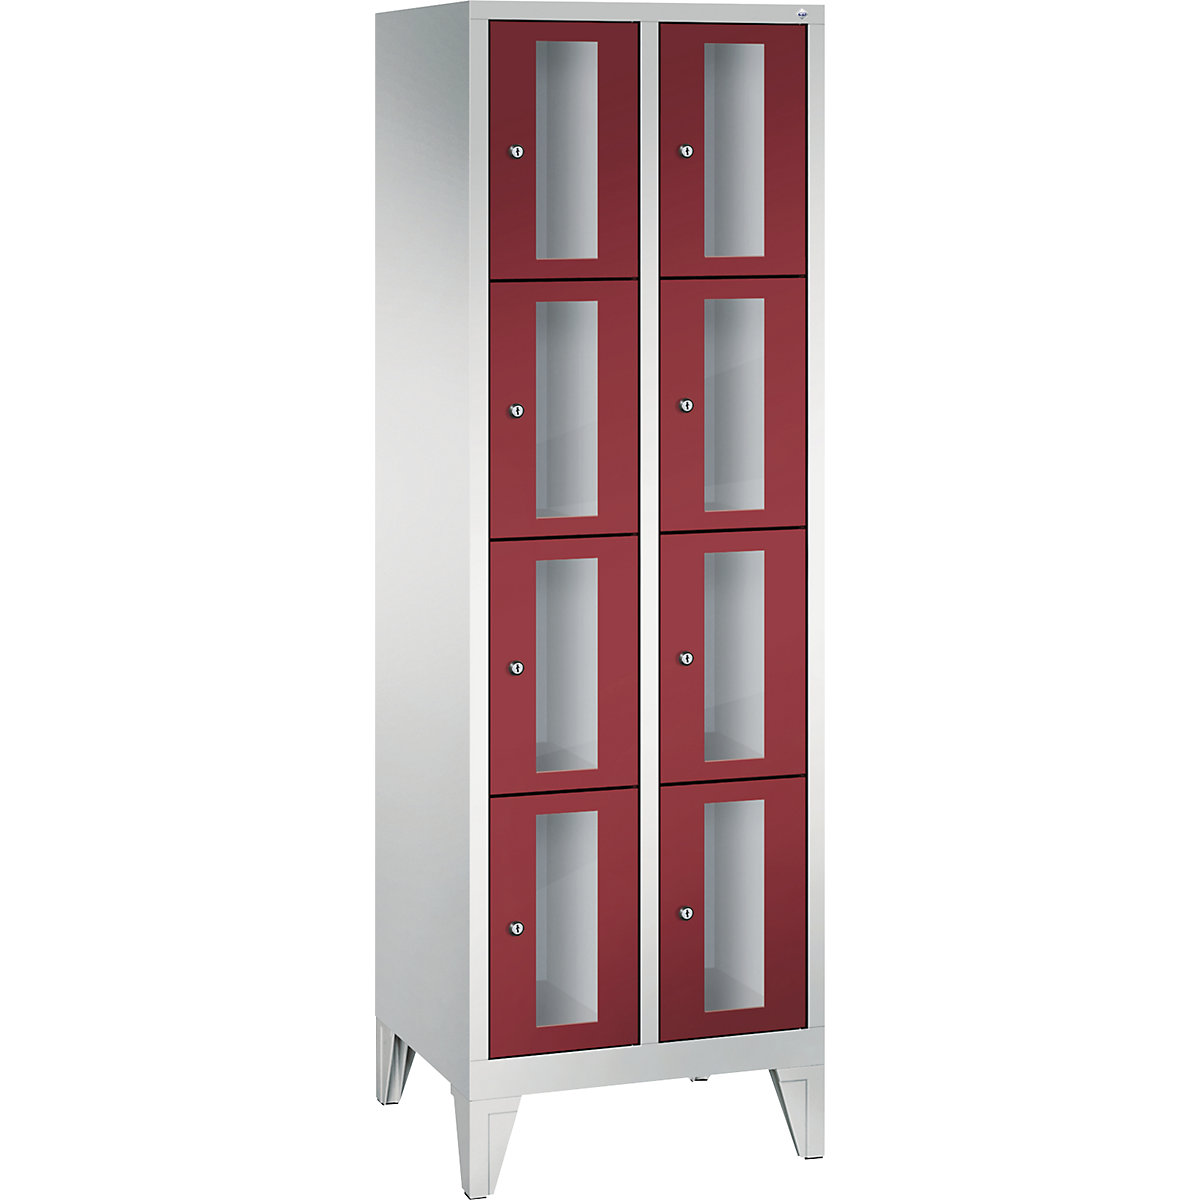 C+P – CLASSIC locker unit, compartment height 375 mm, with feet, 8 compartments, width 610 mm, ruby red door